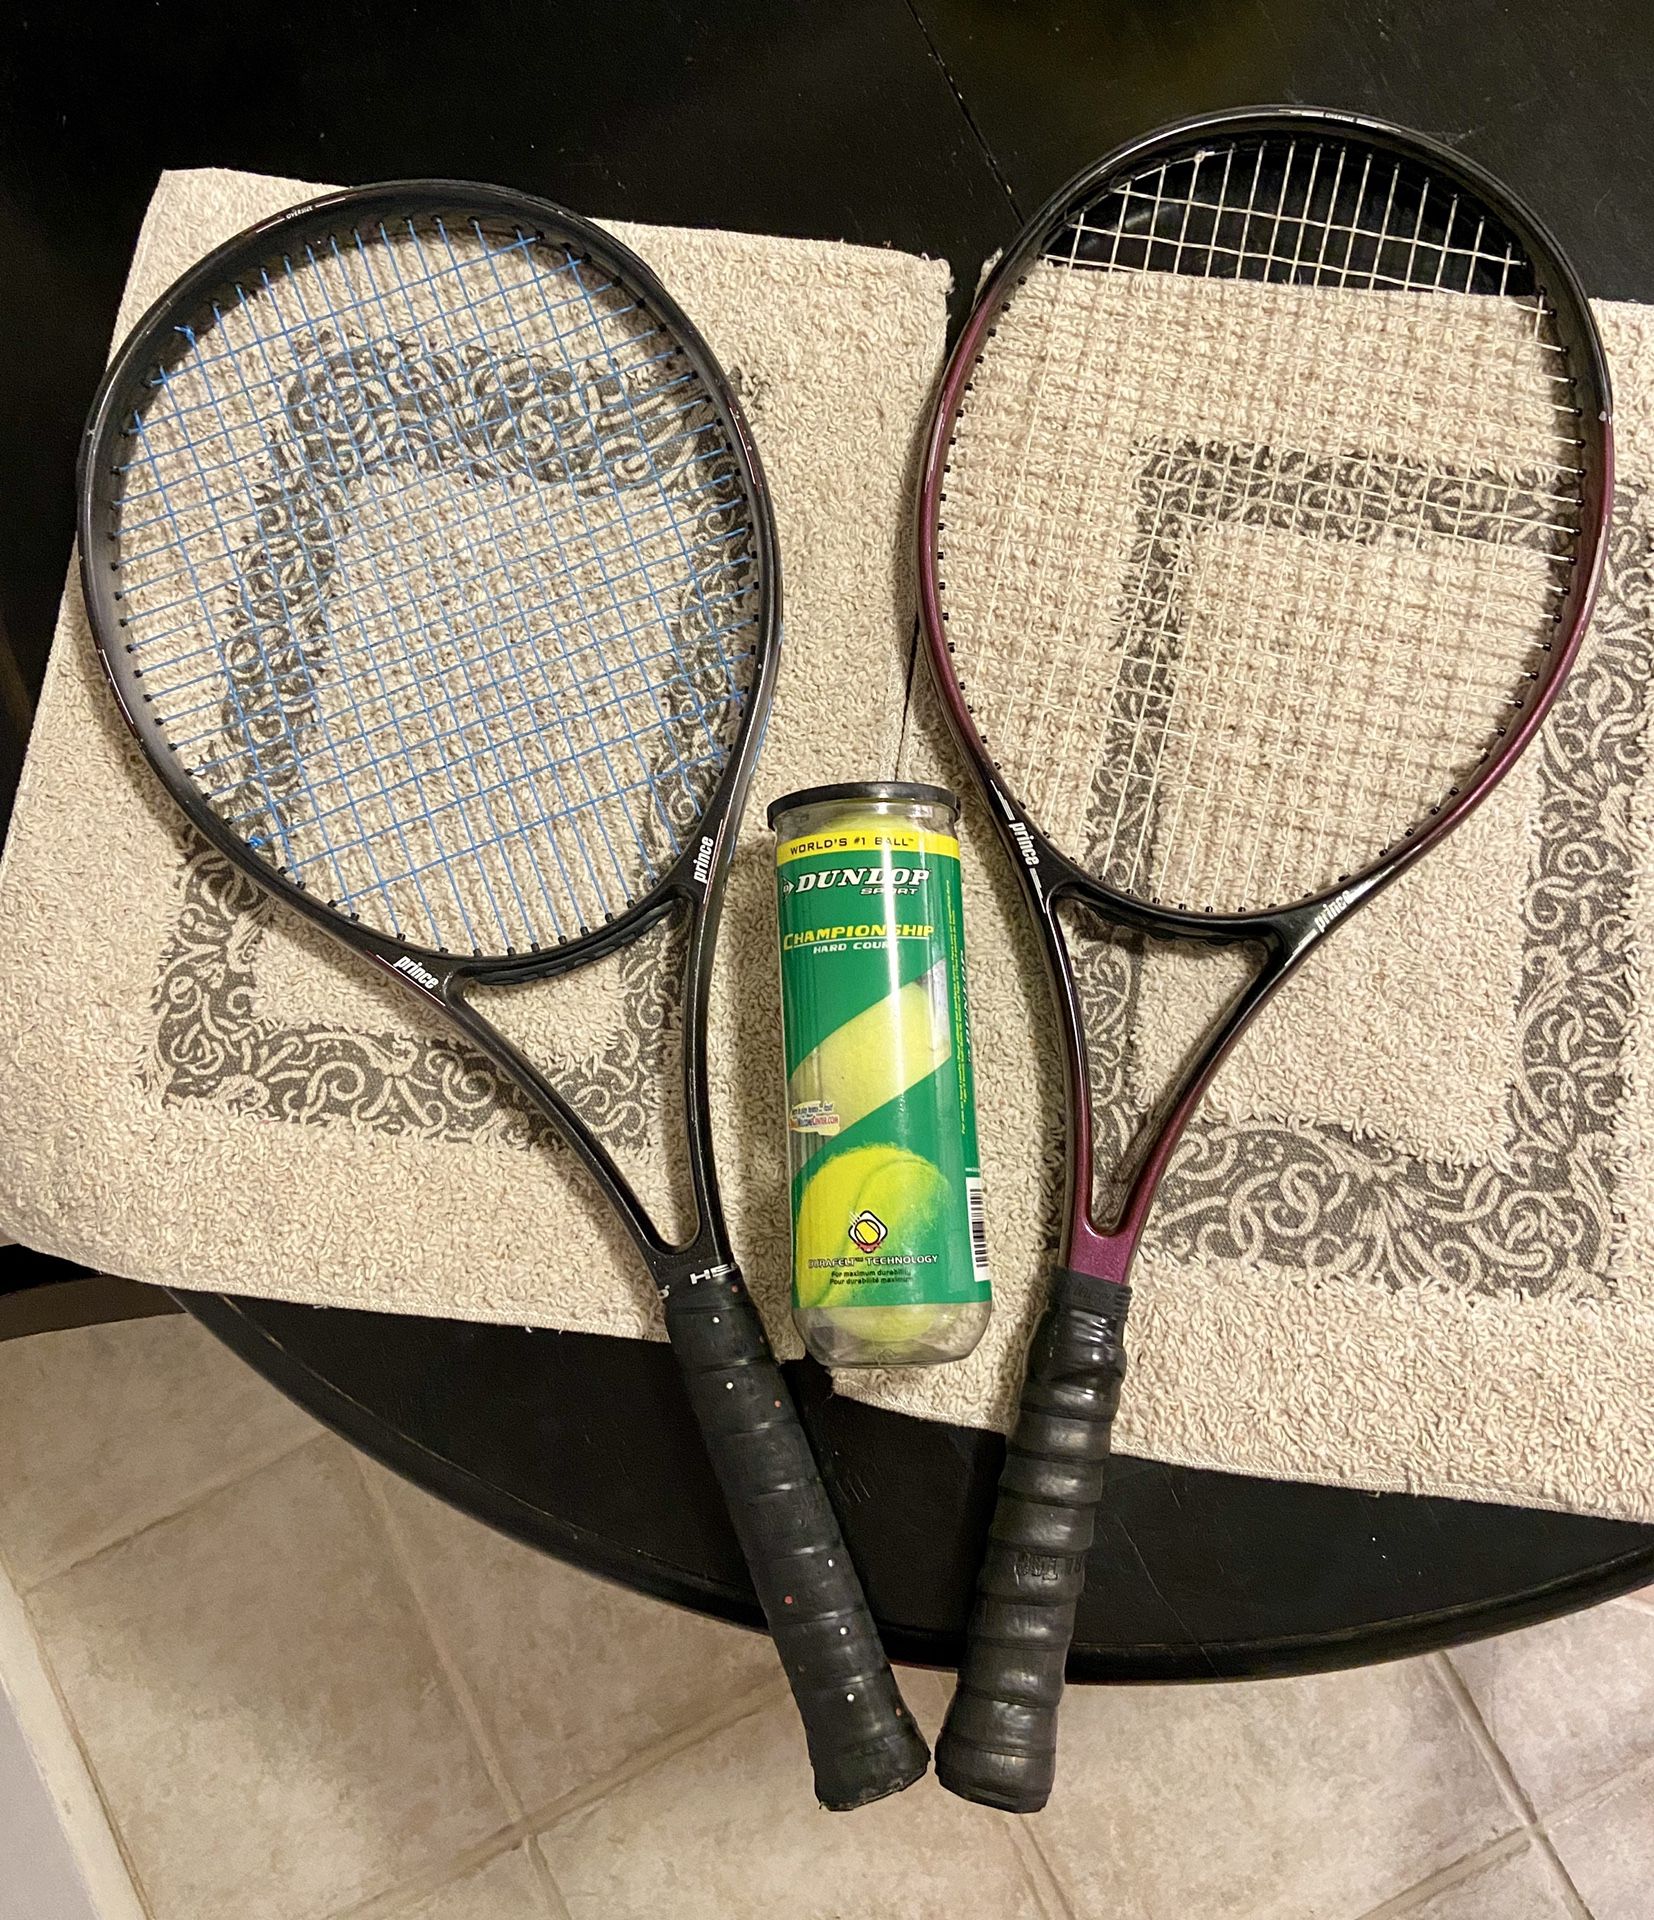 2 Prince Tennis Rackets (w/ 1 unopened can of Tennis balls)